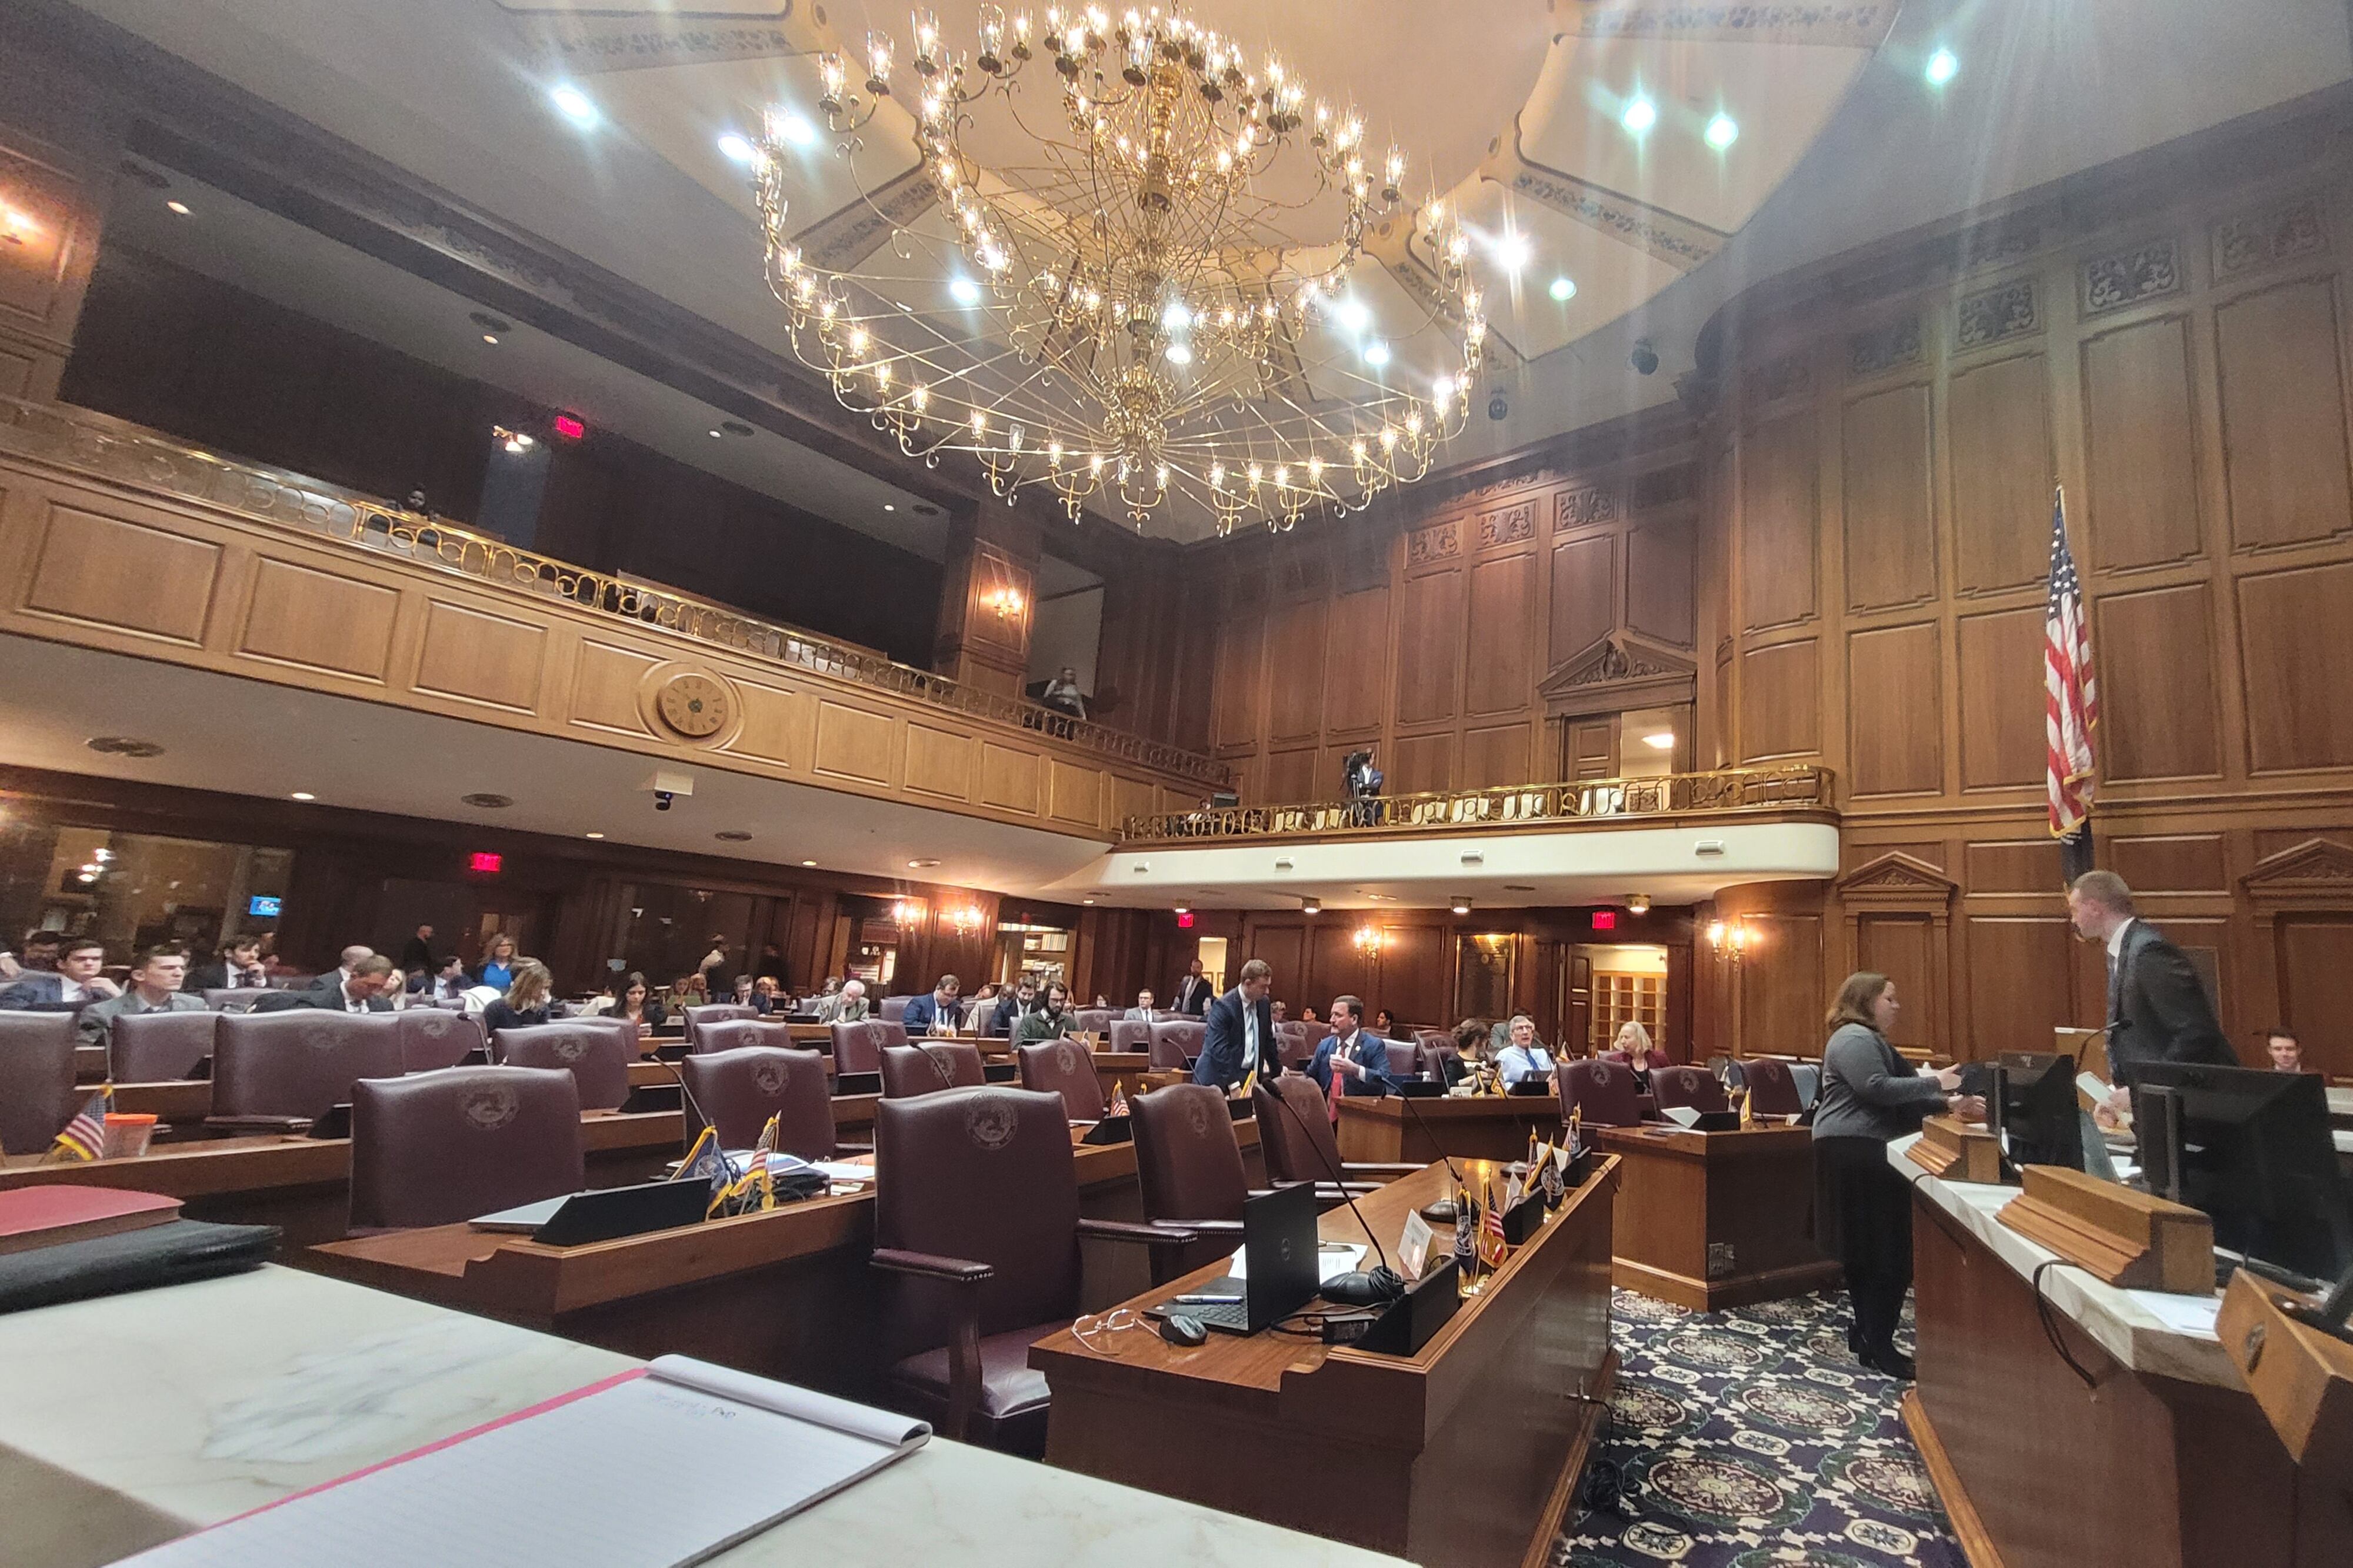 Inside the Indiana House Chamber on the day of a House Education Committee meeting, with lawmakers not yet in their seats and a chandelier overhead.